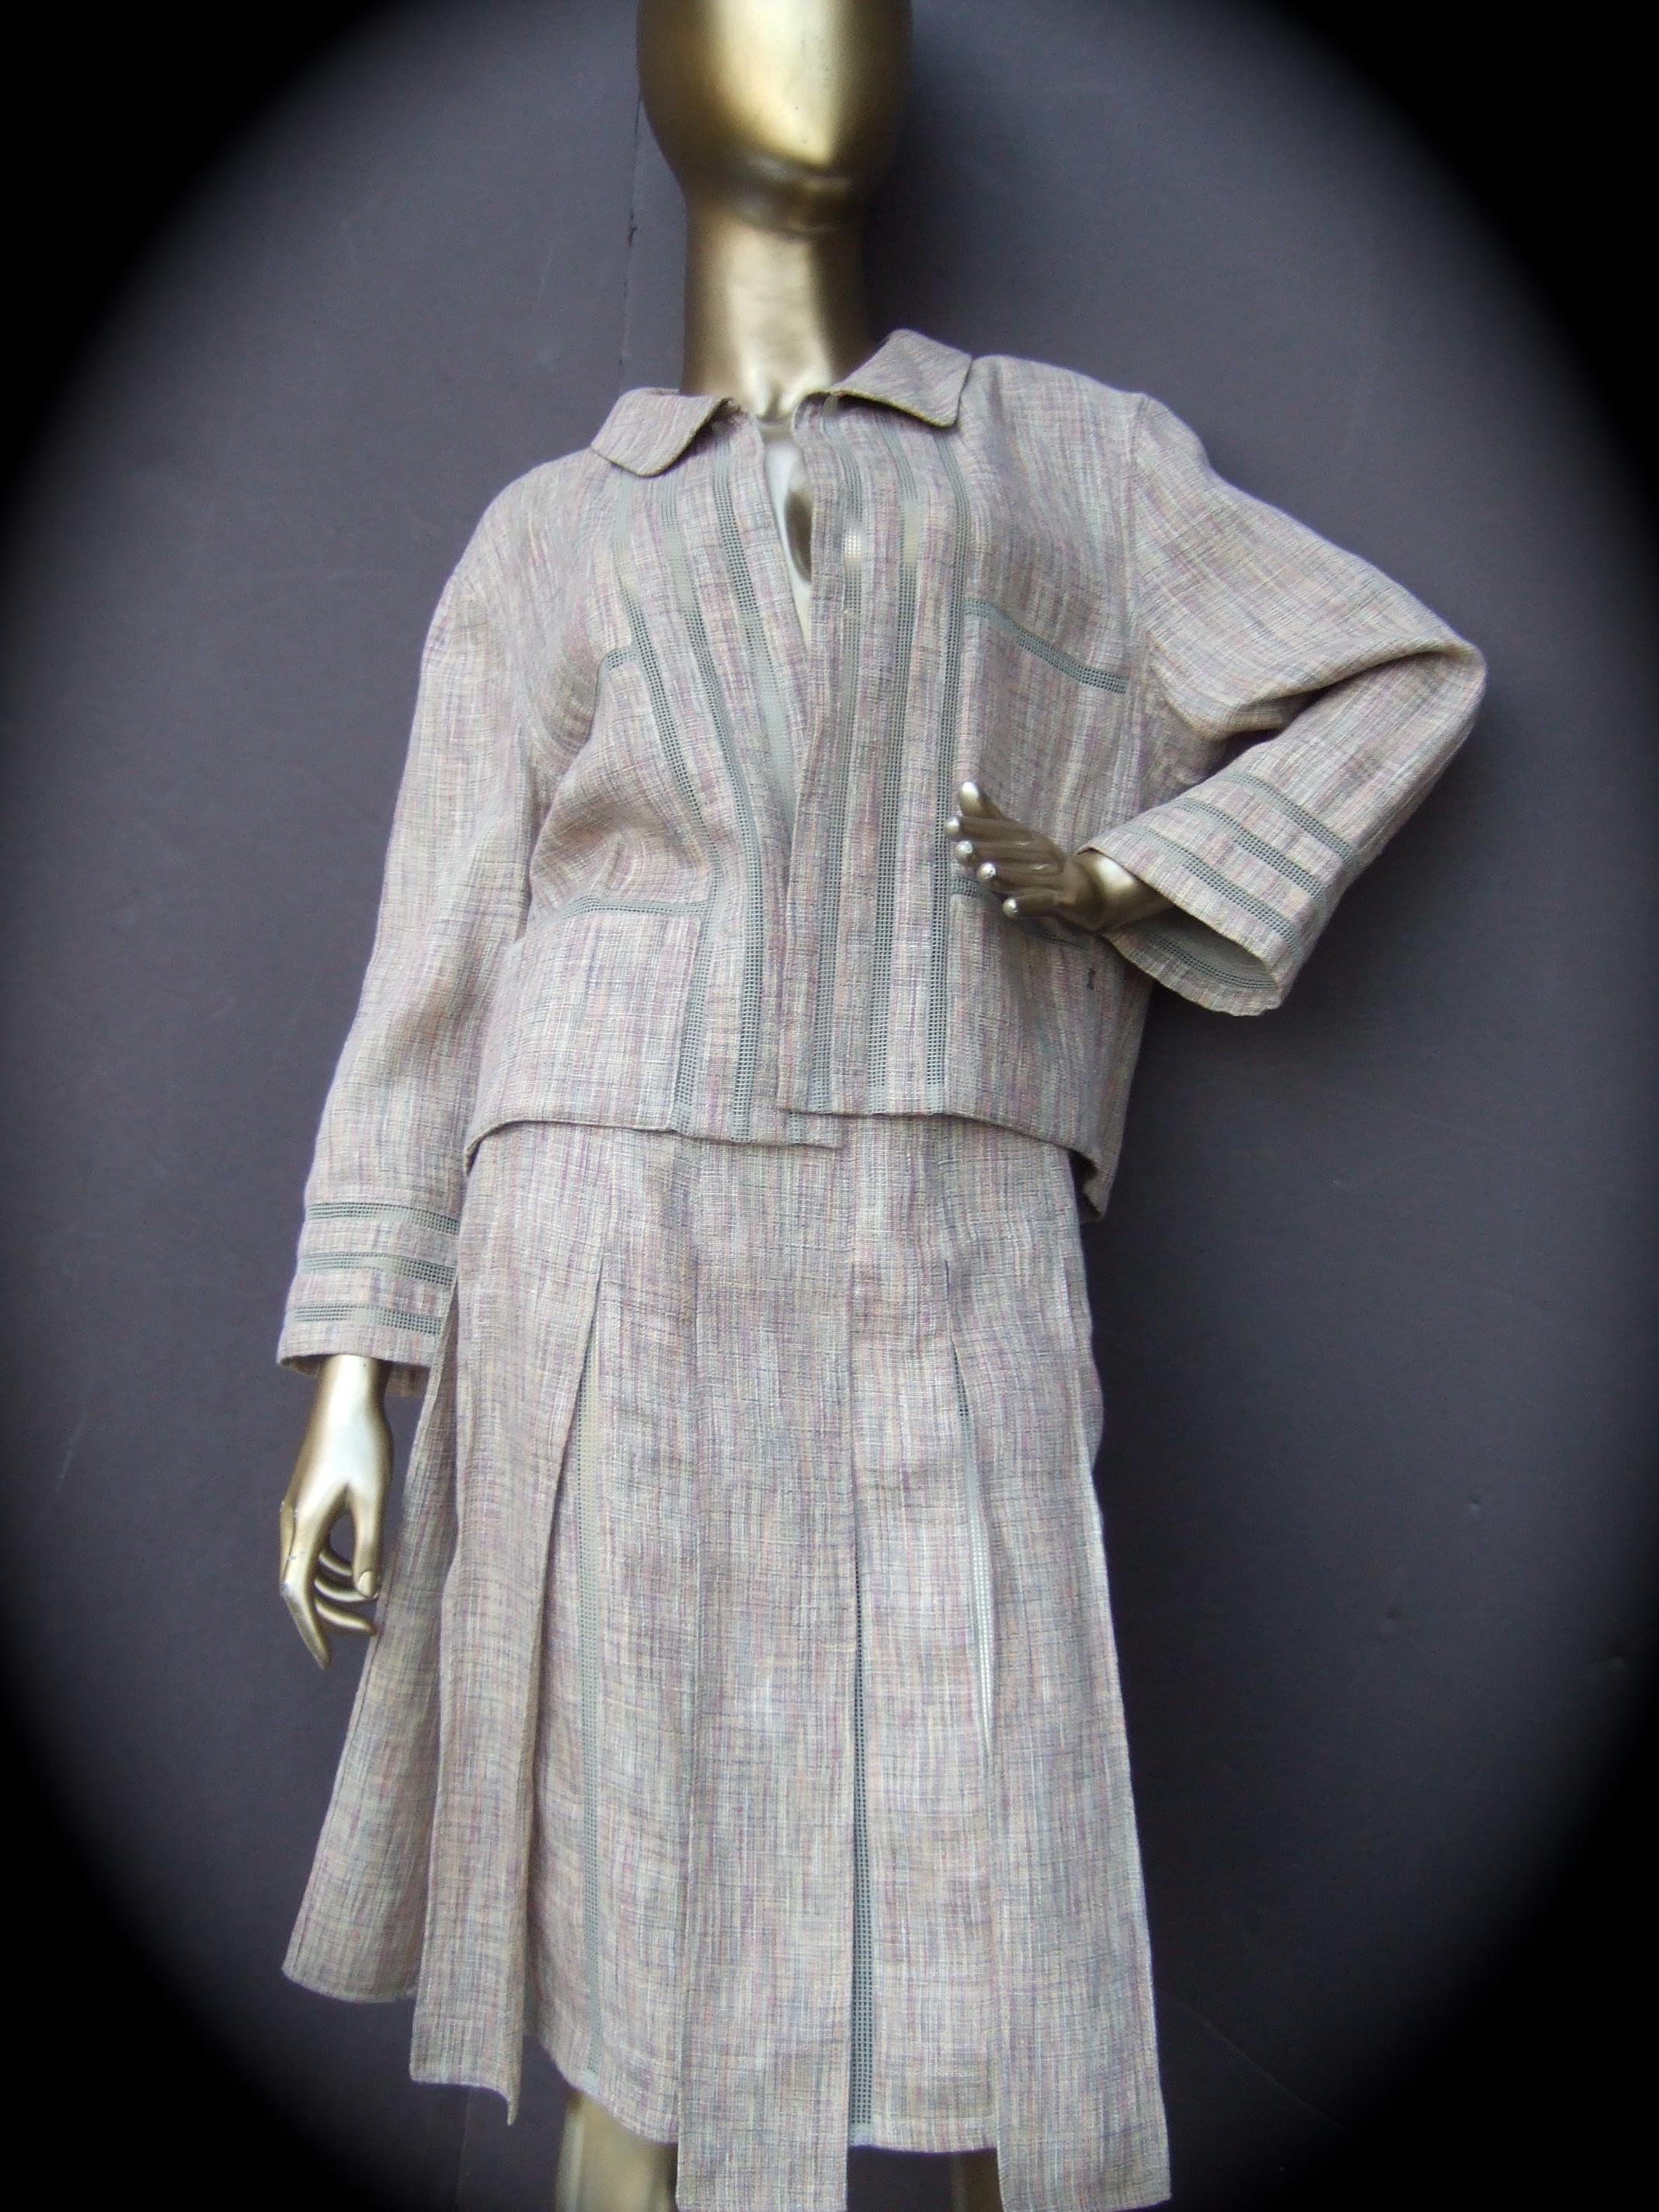 Chanel Chic Beige Linen & Cotton Blend Skirt Suit c 2000 Size 40  In Good Condition For Sale In University City, MO